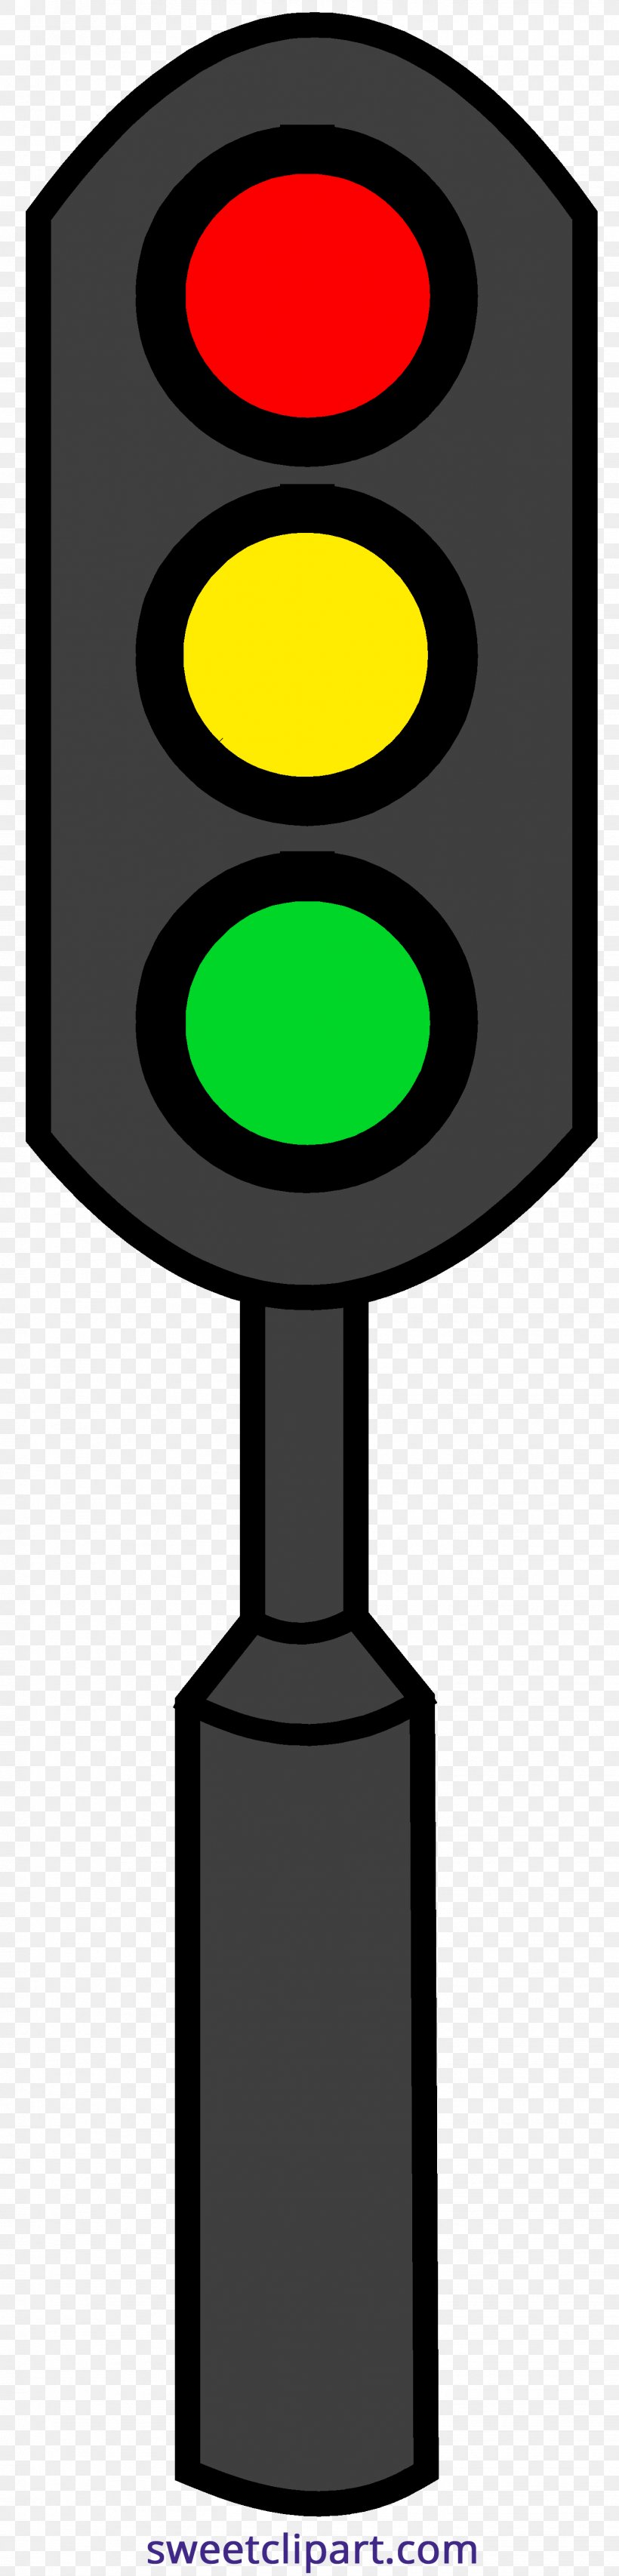 Clip Art Traffic Light Free Content Graphics Image, PNG, 1419x5907px, Traffic Light, Greenlight, Traffic, Traffic Sign, Transport Download Free